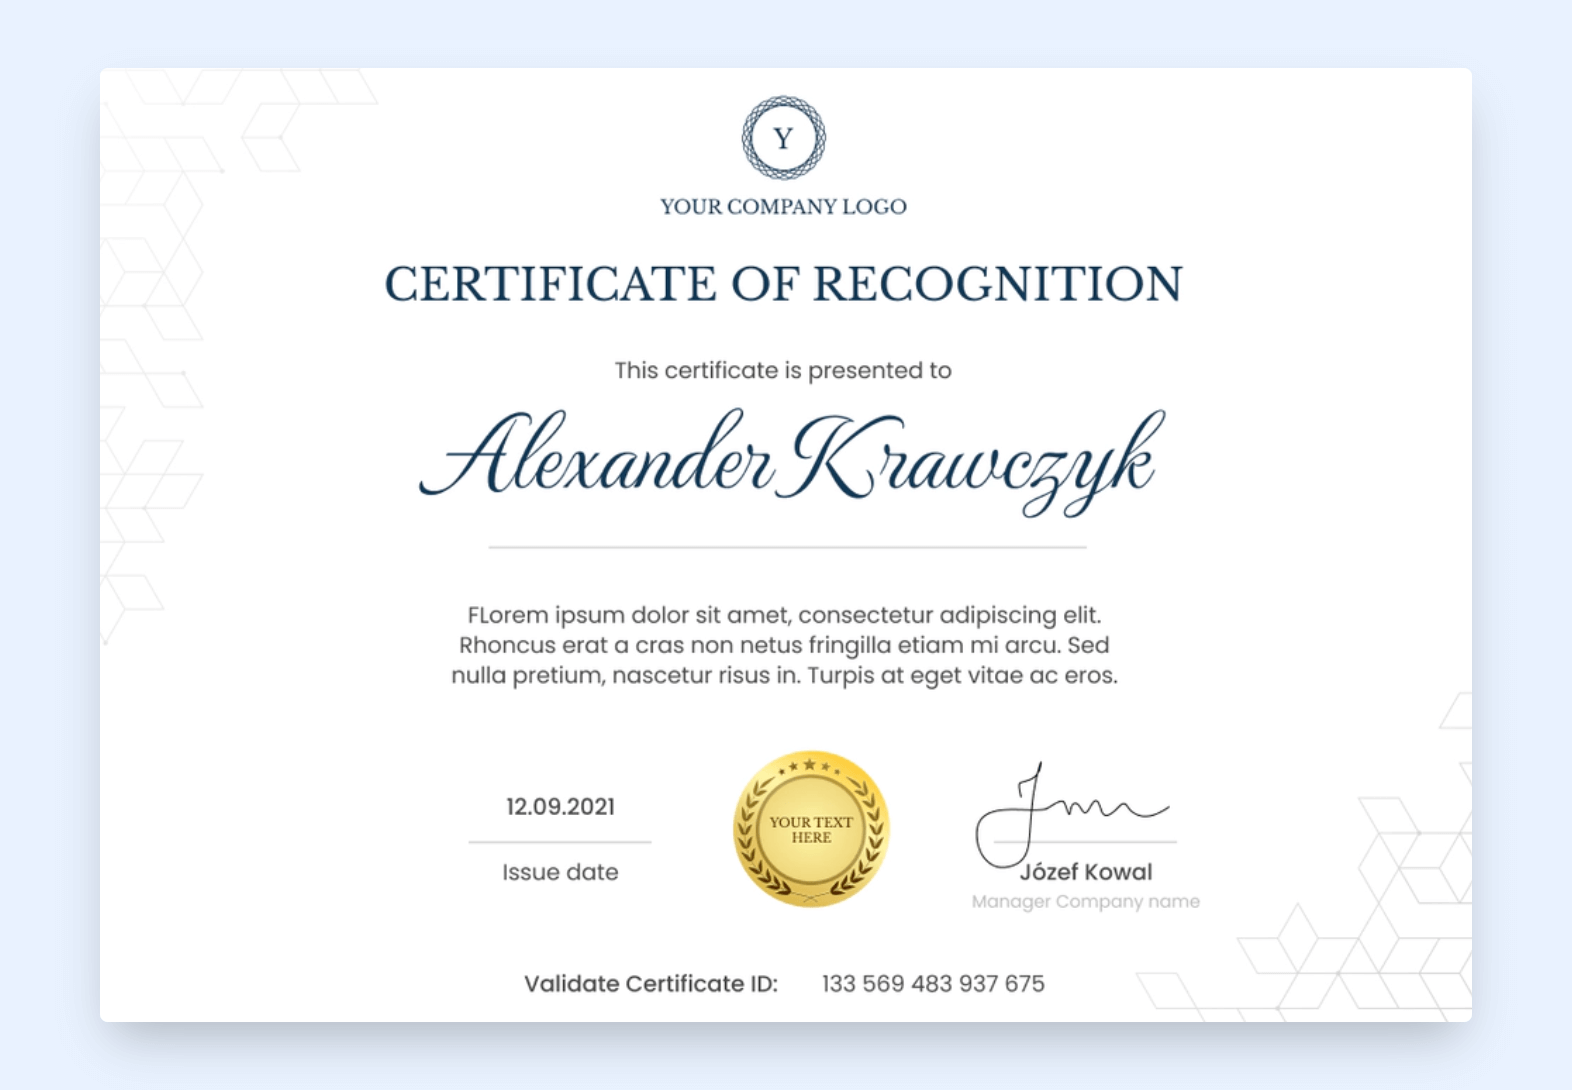 Simple Google Slides certificate of recognition template.